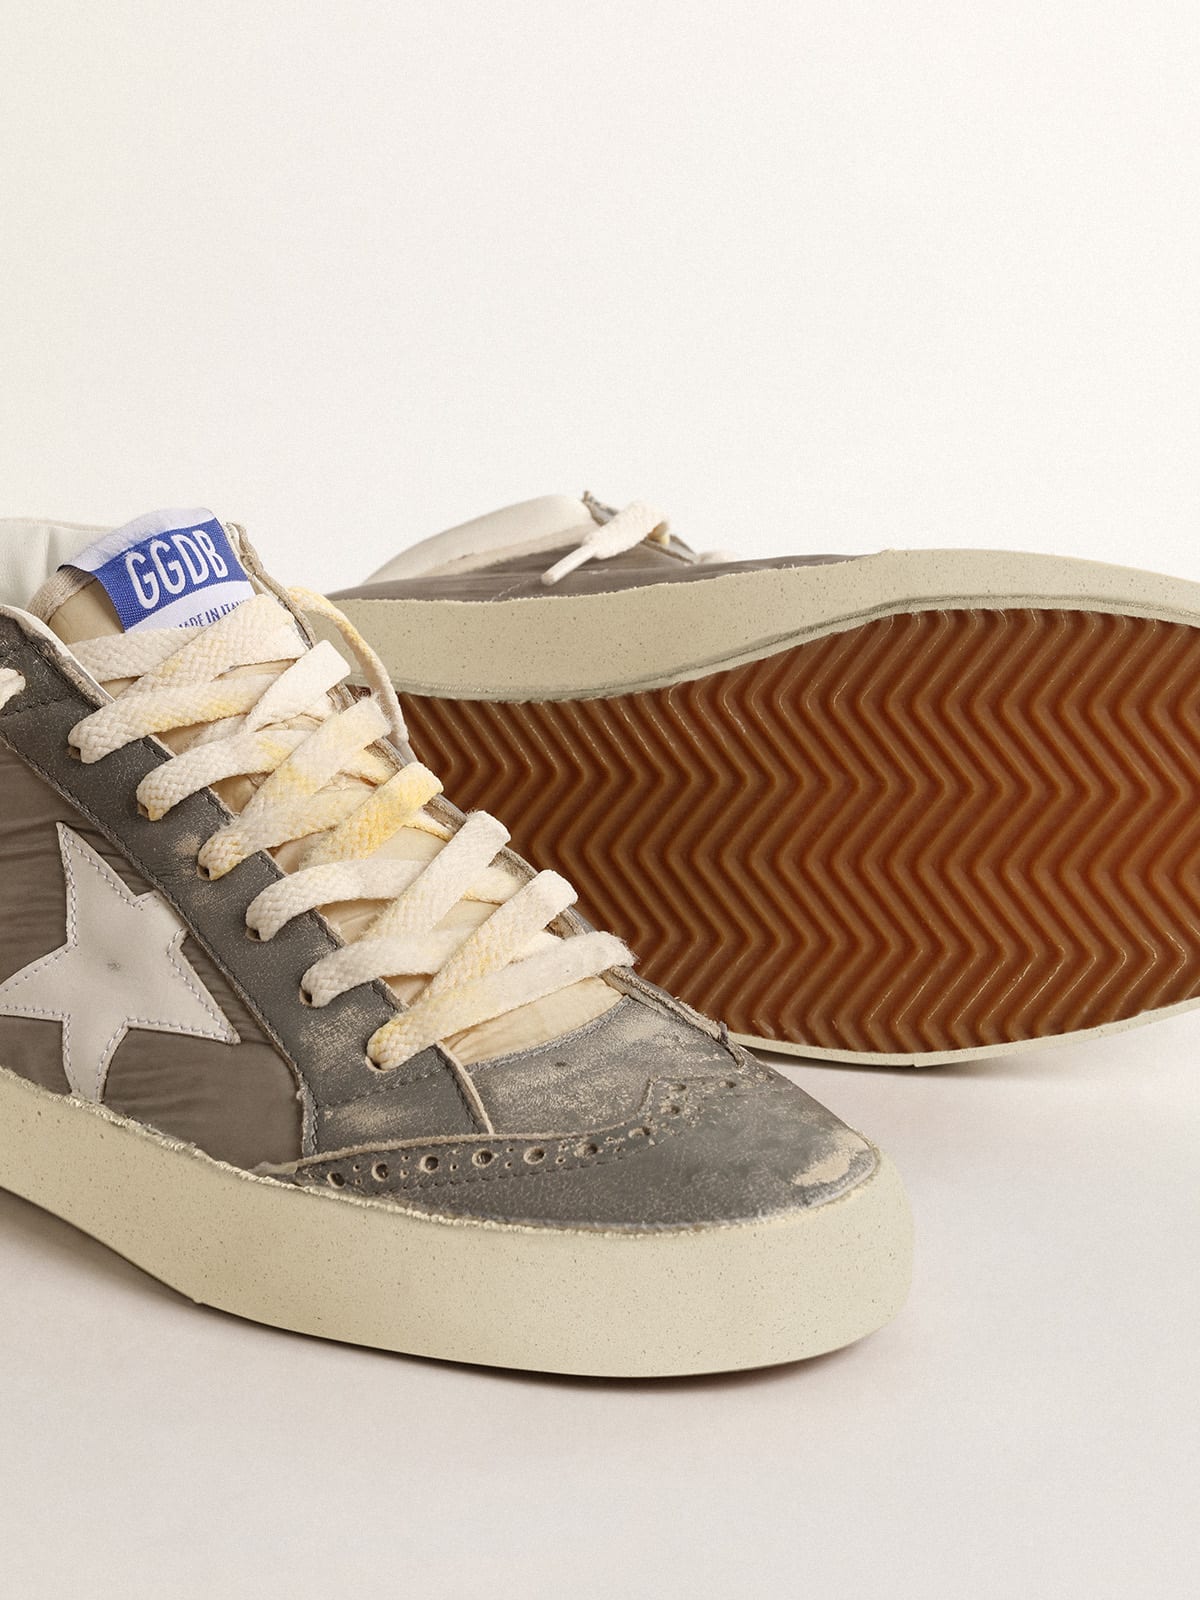 Golden Goose - Mid Star in gray nylon and nappa leather with white leather star in 